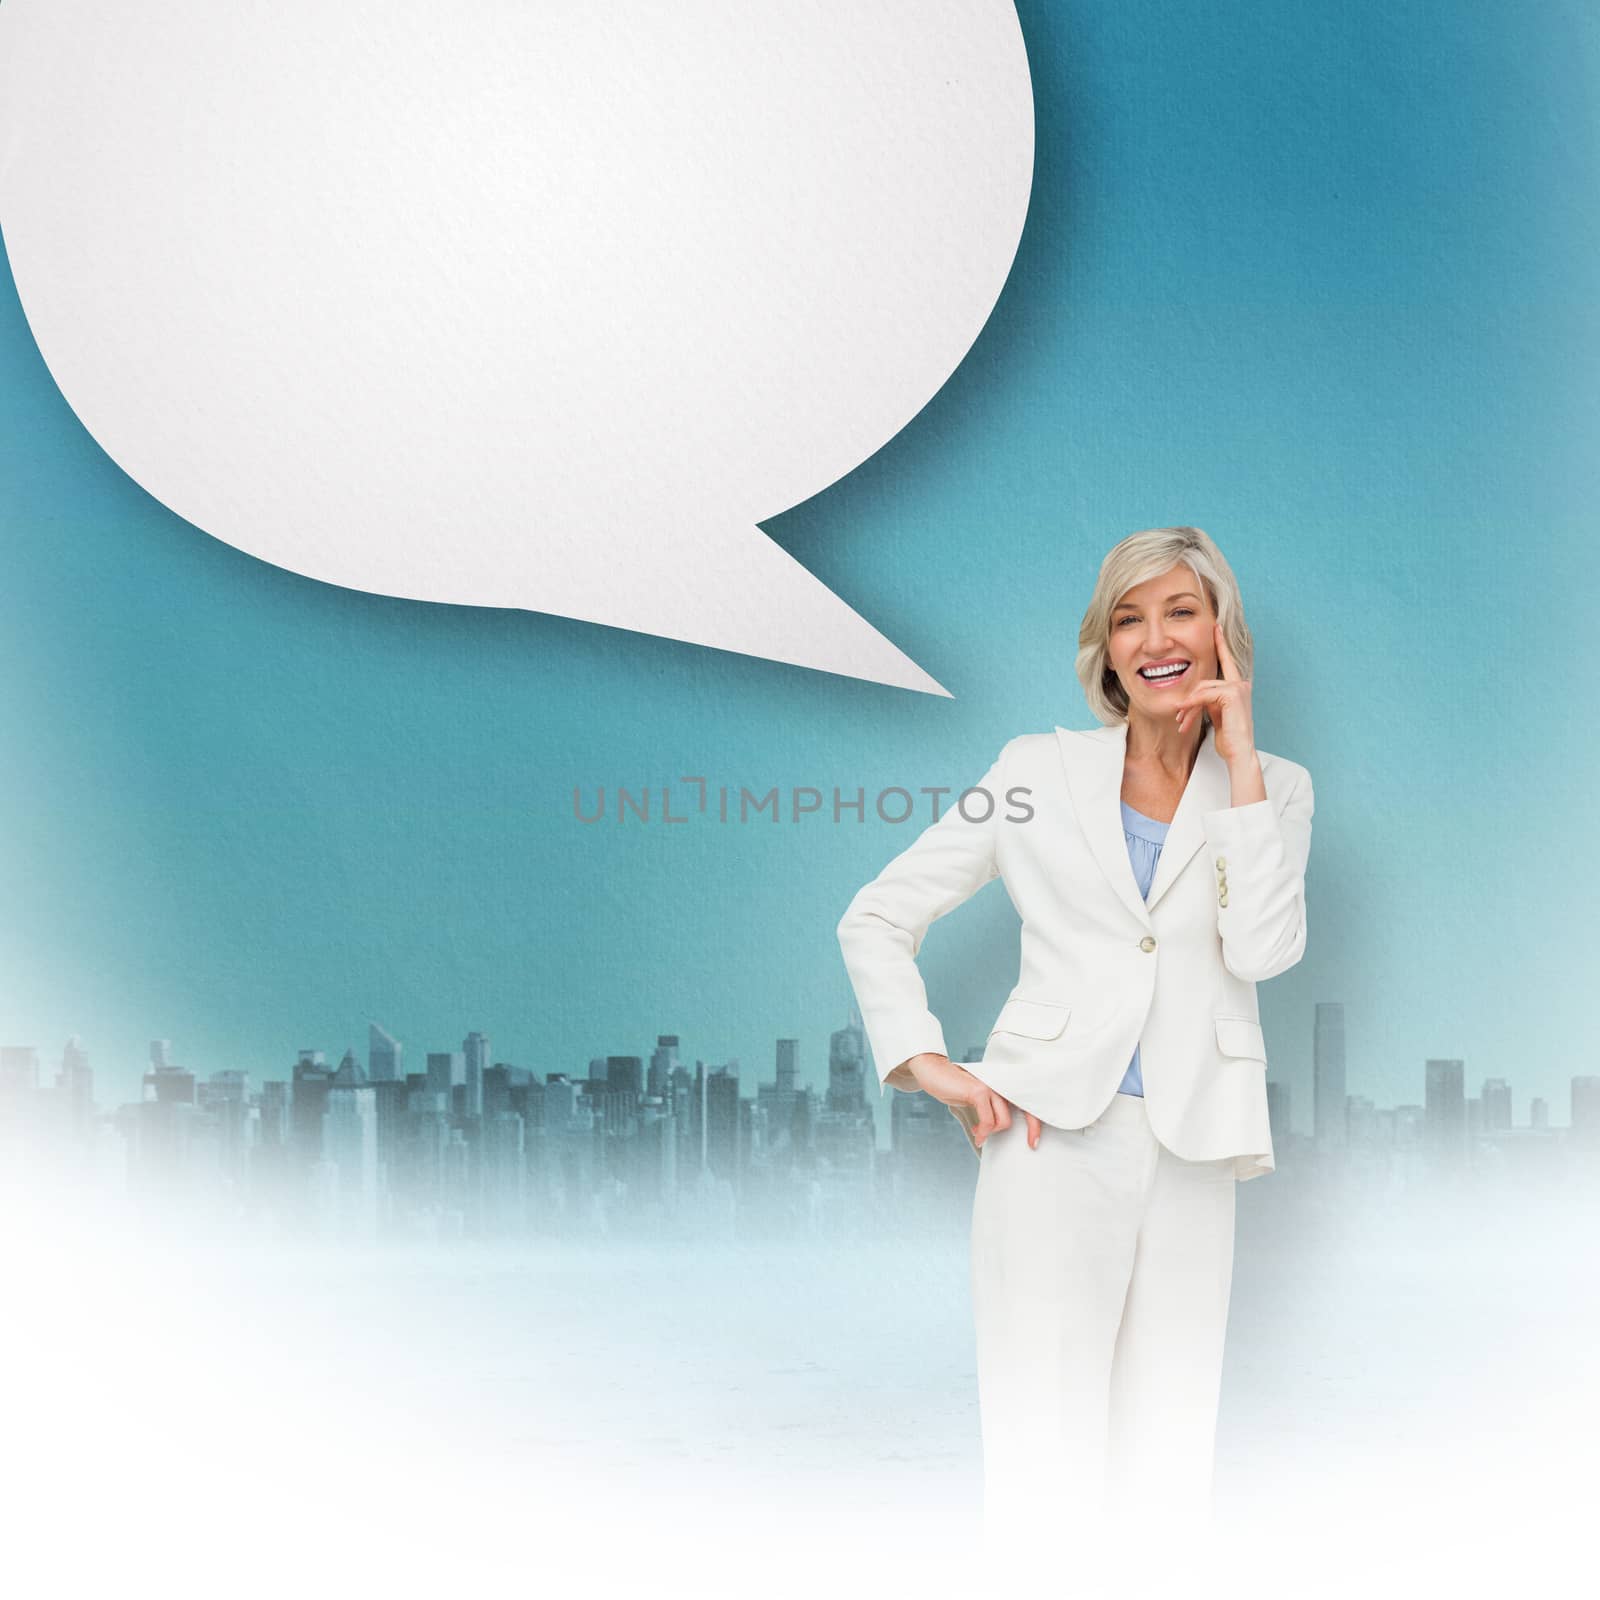 Thinking businesswoman with speech bubble against cityscape on the horizon